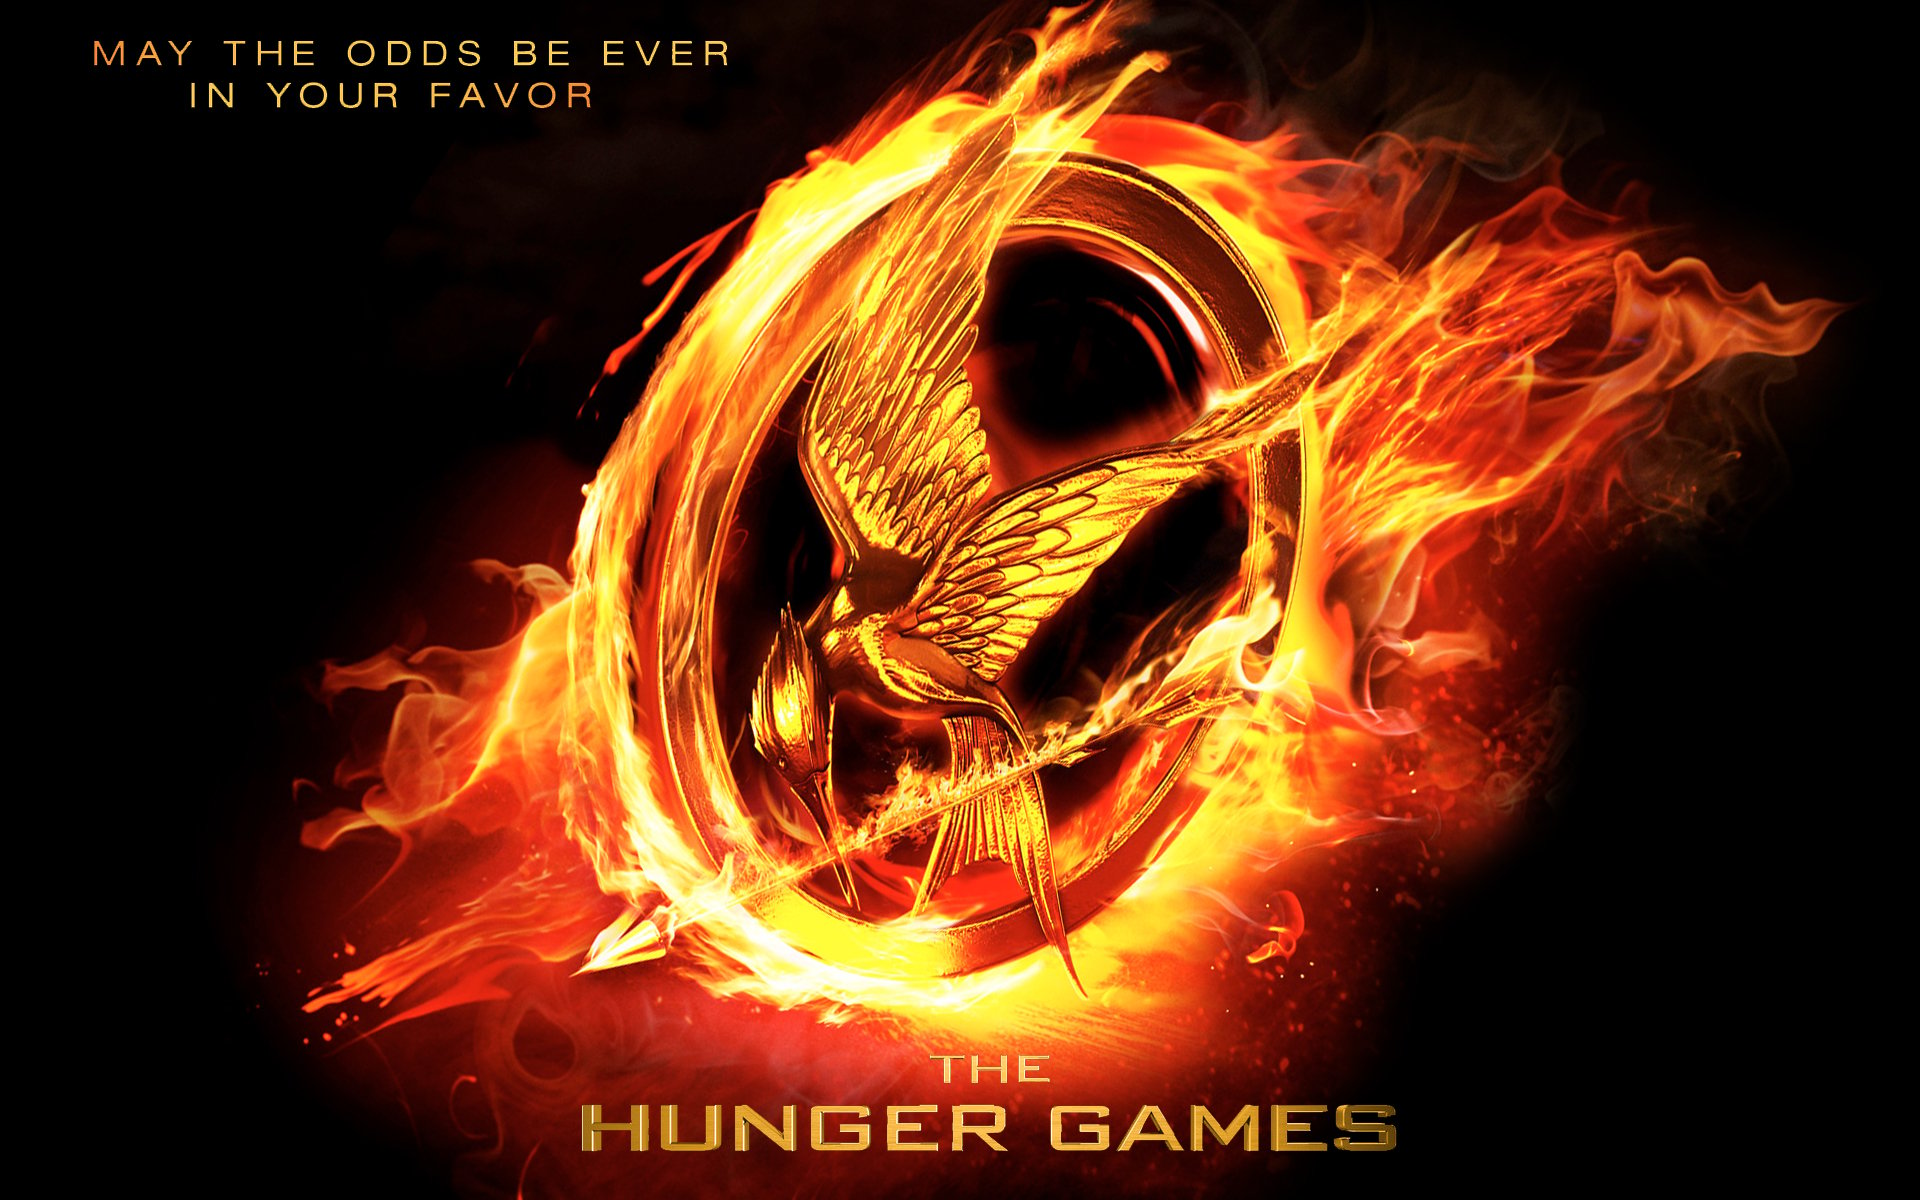 The Hunger Games Wallpapers 1920x1200 Movie Wallpapers 1920x1200